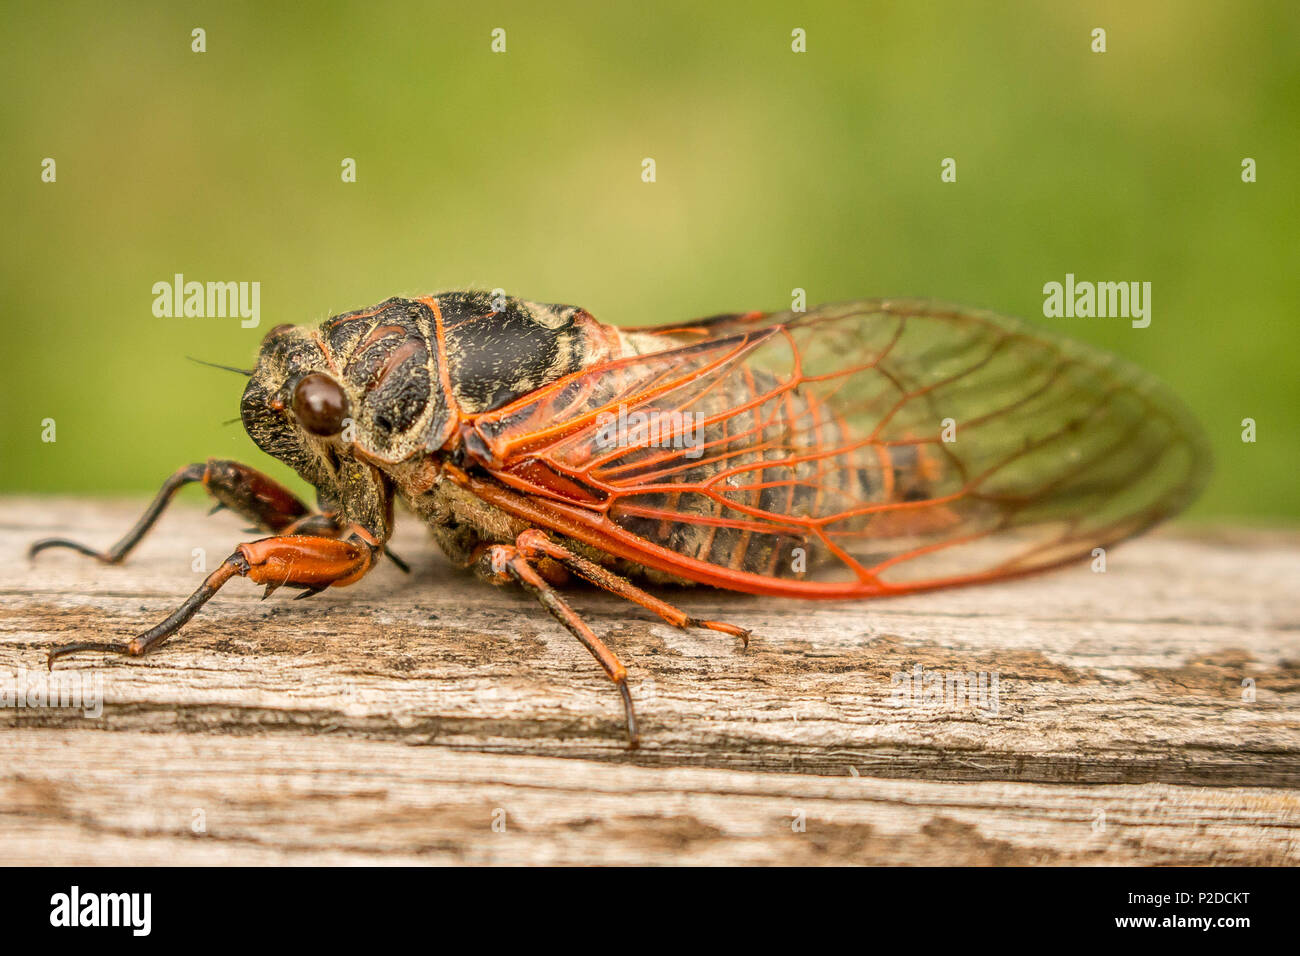 Two adult cicadas Tibicina haematodes with orange veins on the wings Stock Photo